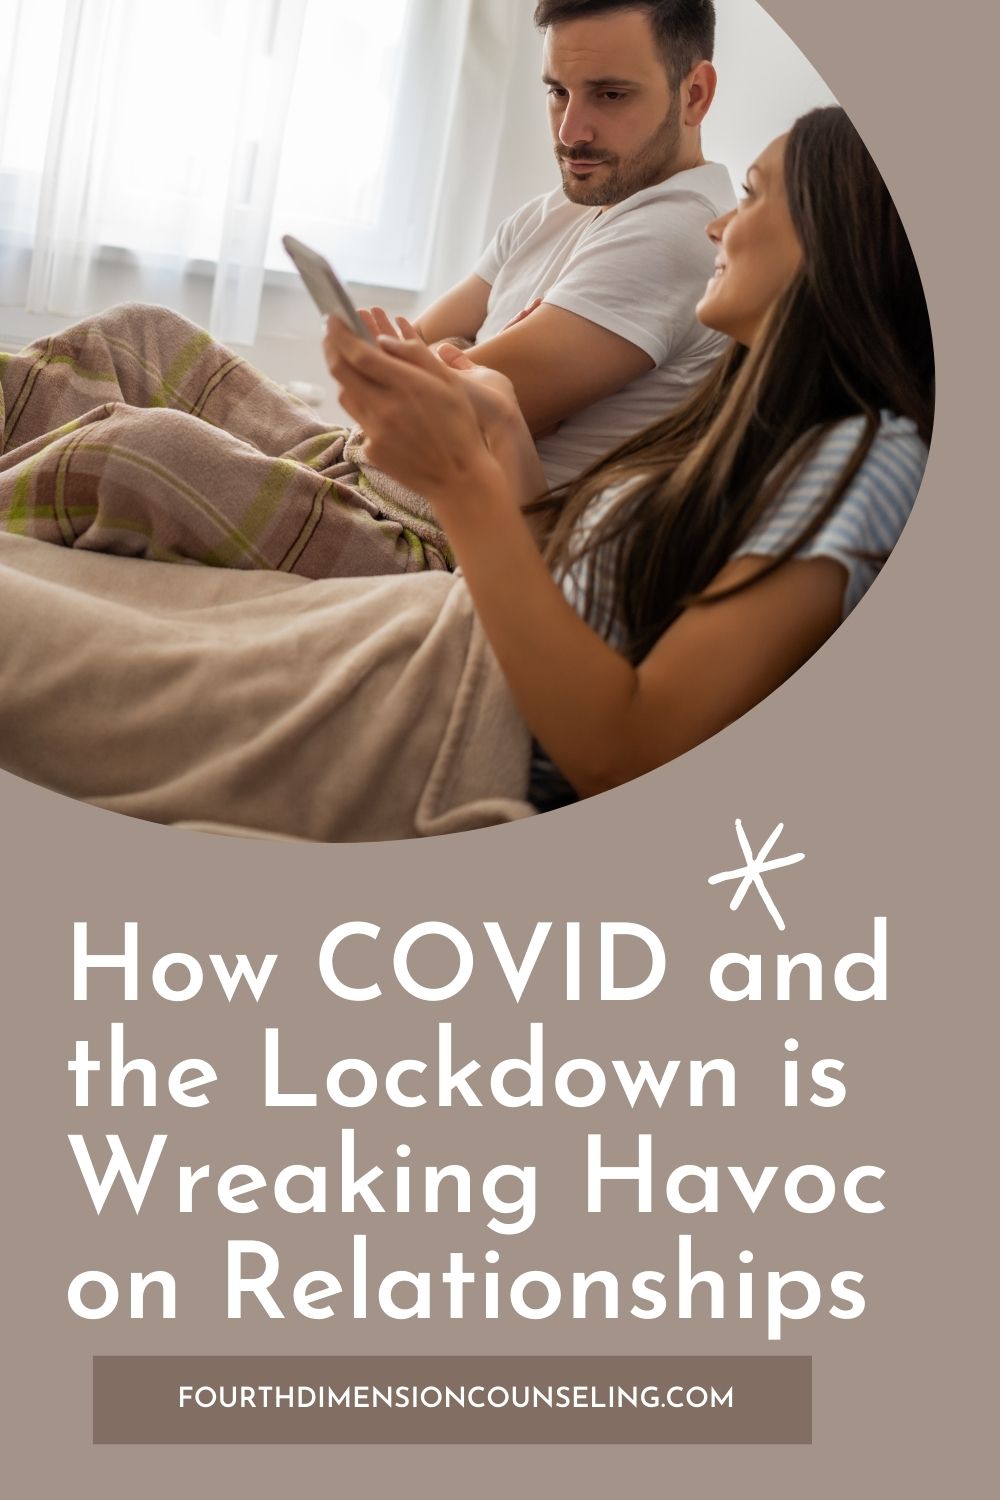 How COVID and the Lockdown is Wreaking Havoc on Relationships